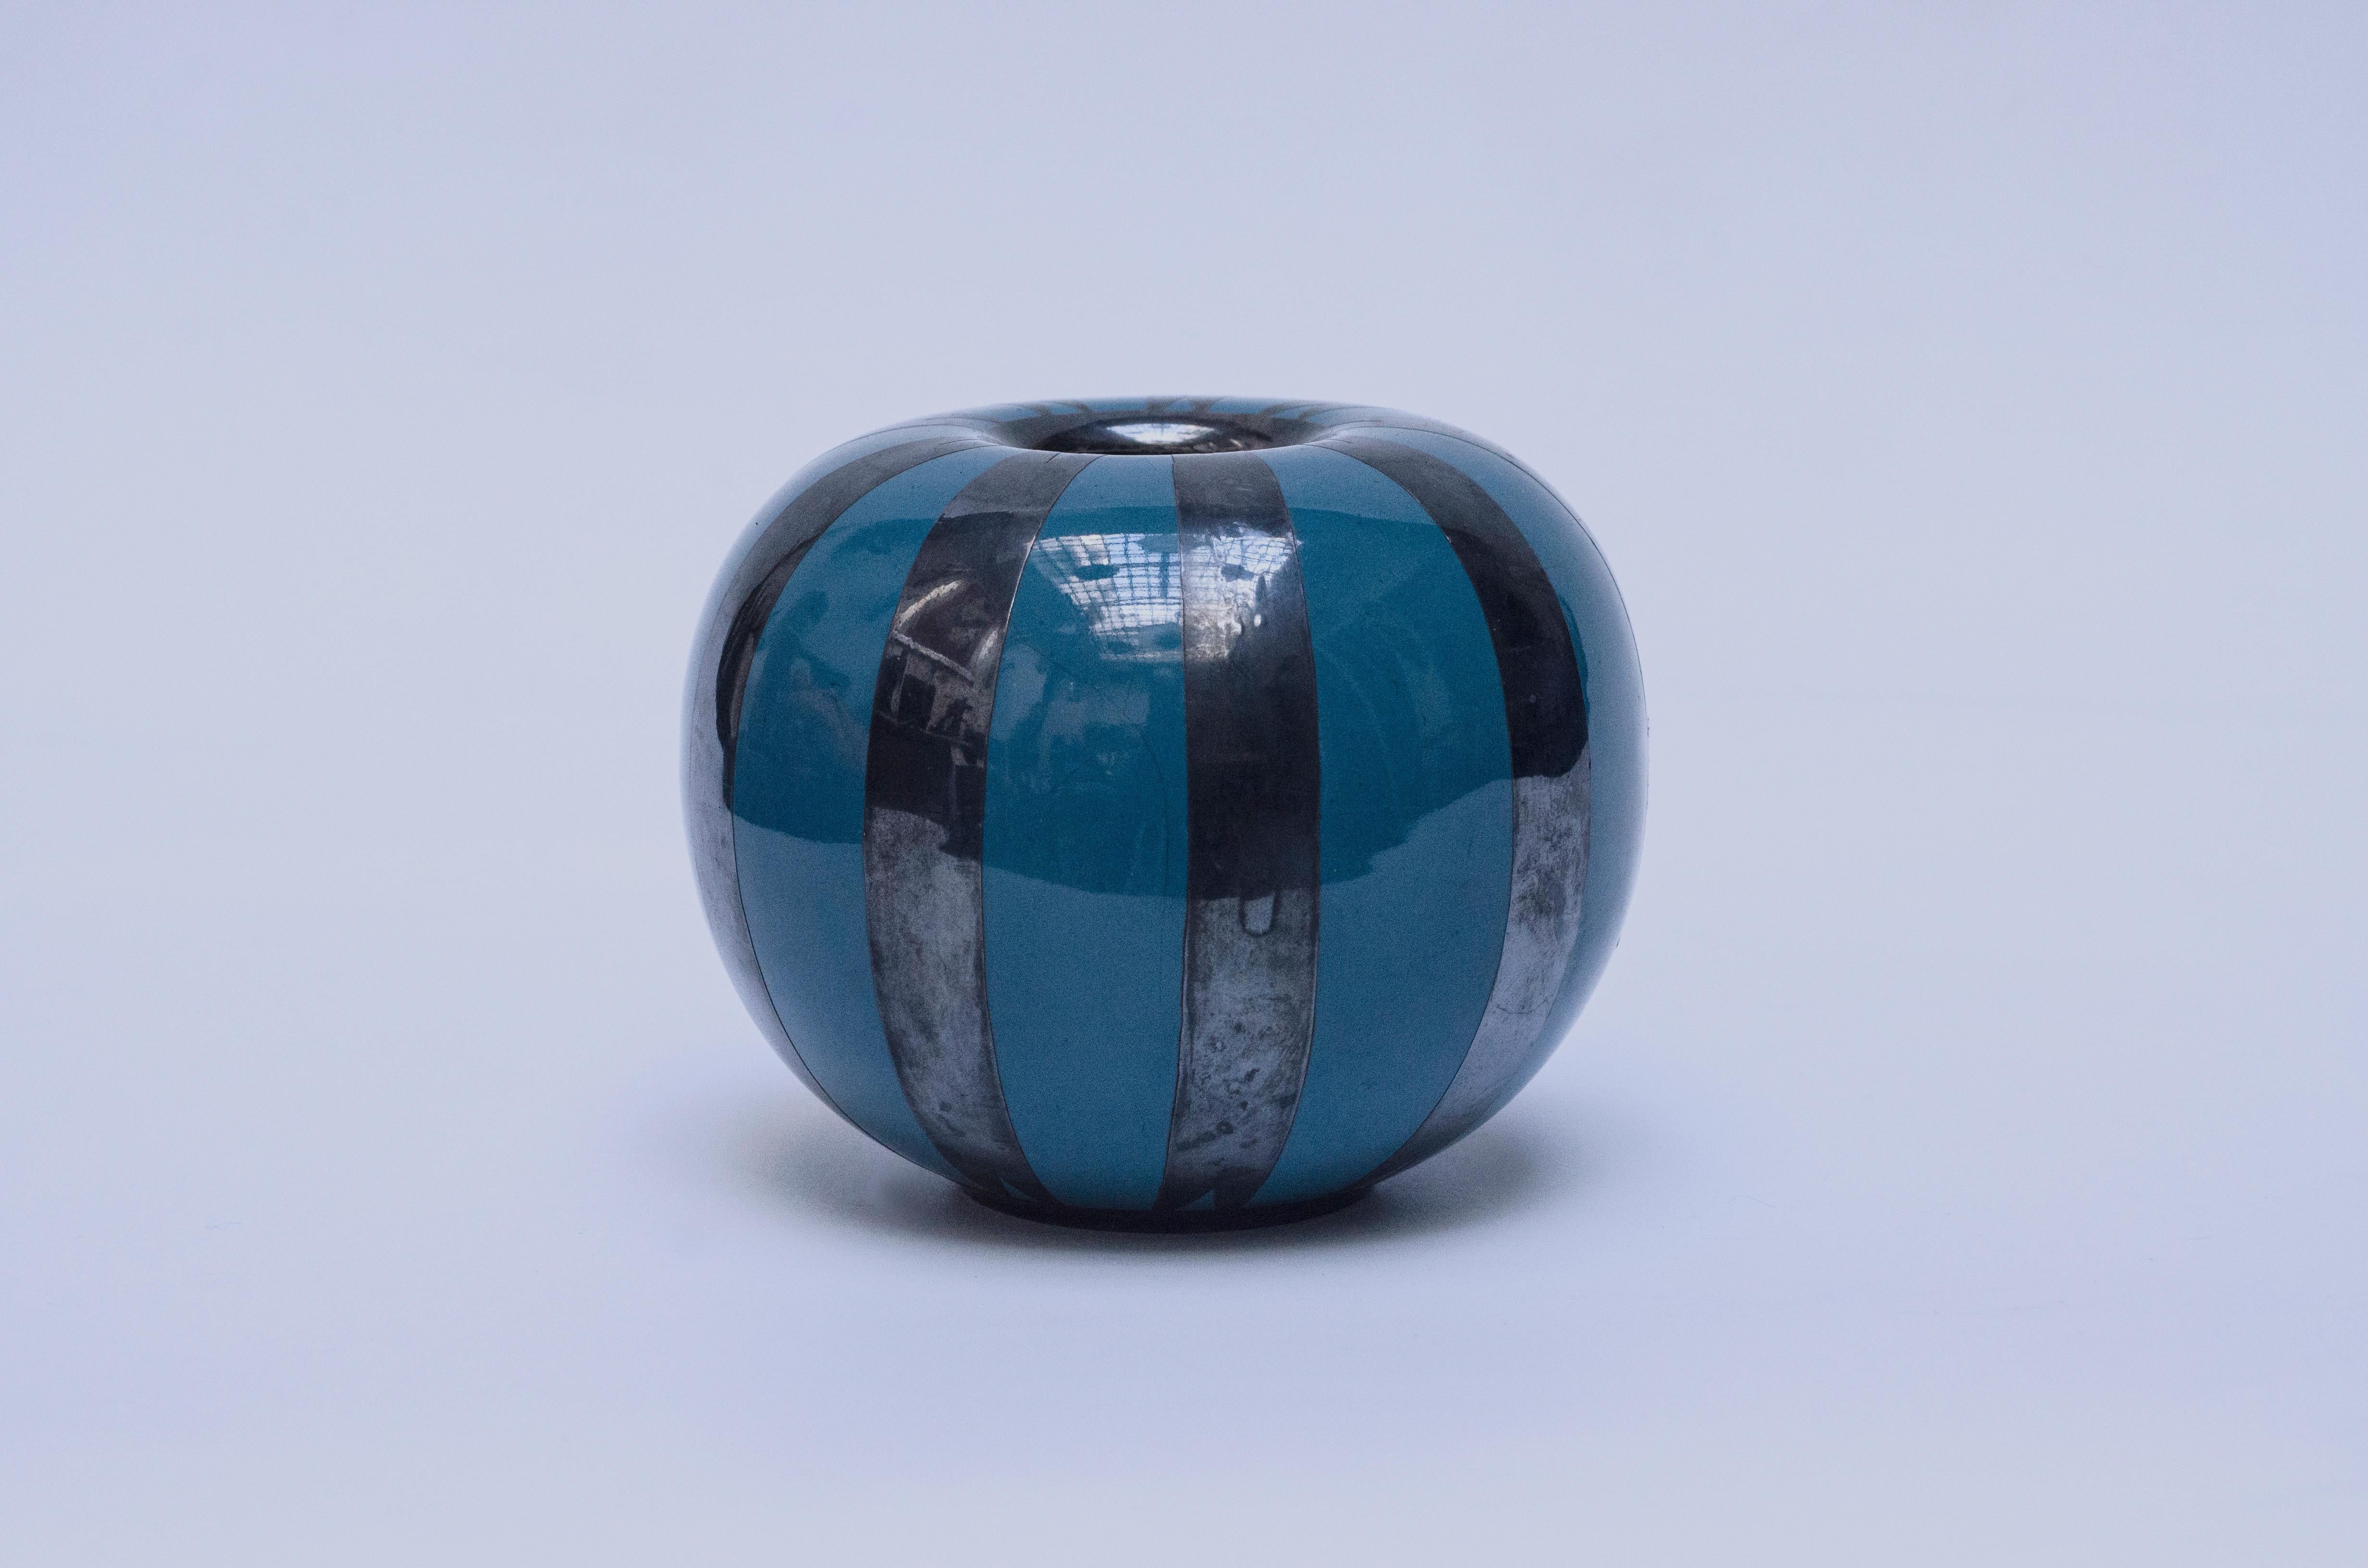 Ceramic vase in blue colors with silver bands. Made by the Richard Ginori factory. Signing Richard Ginori - M.1710 - M448E.

Italy, CIRCA 1920.